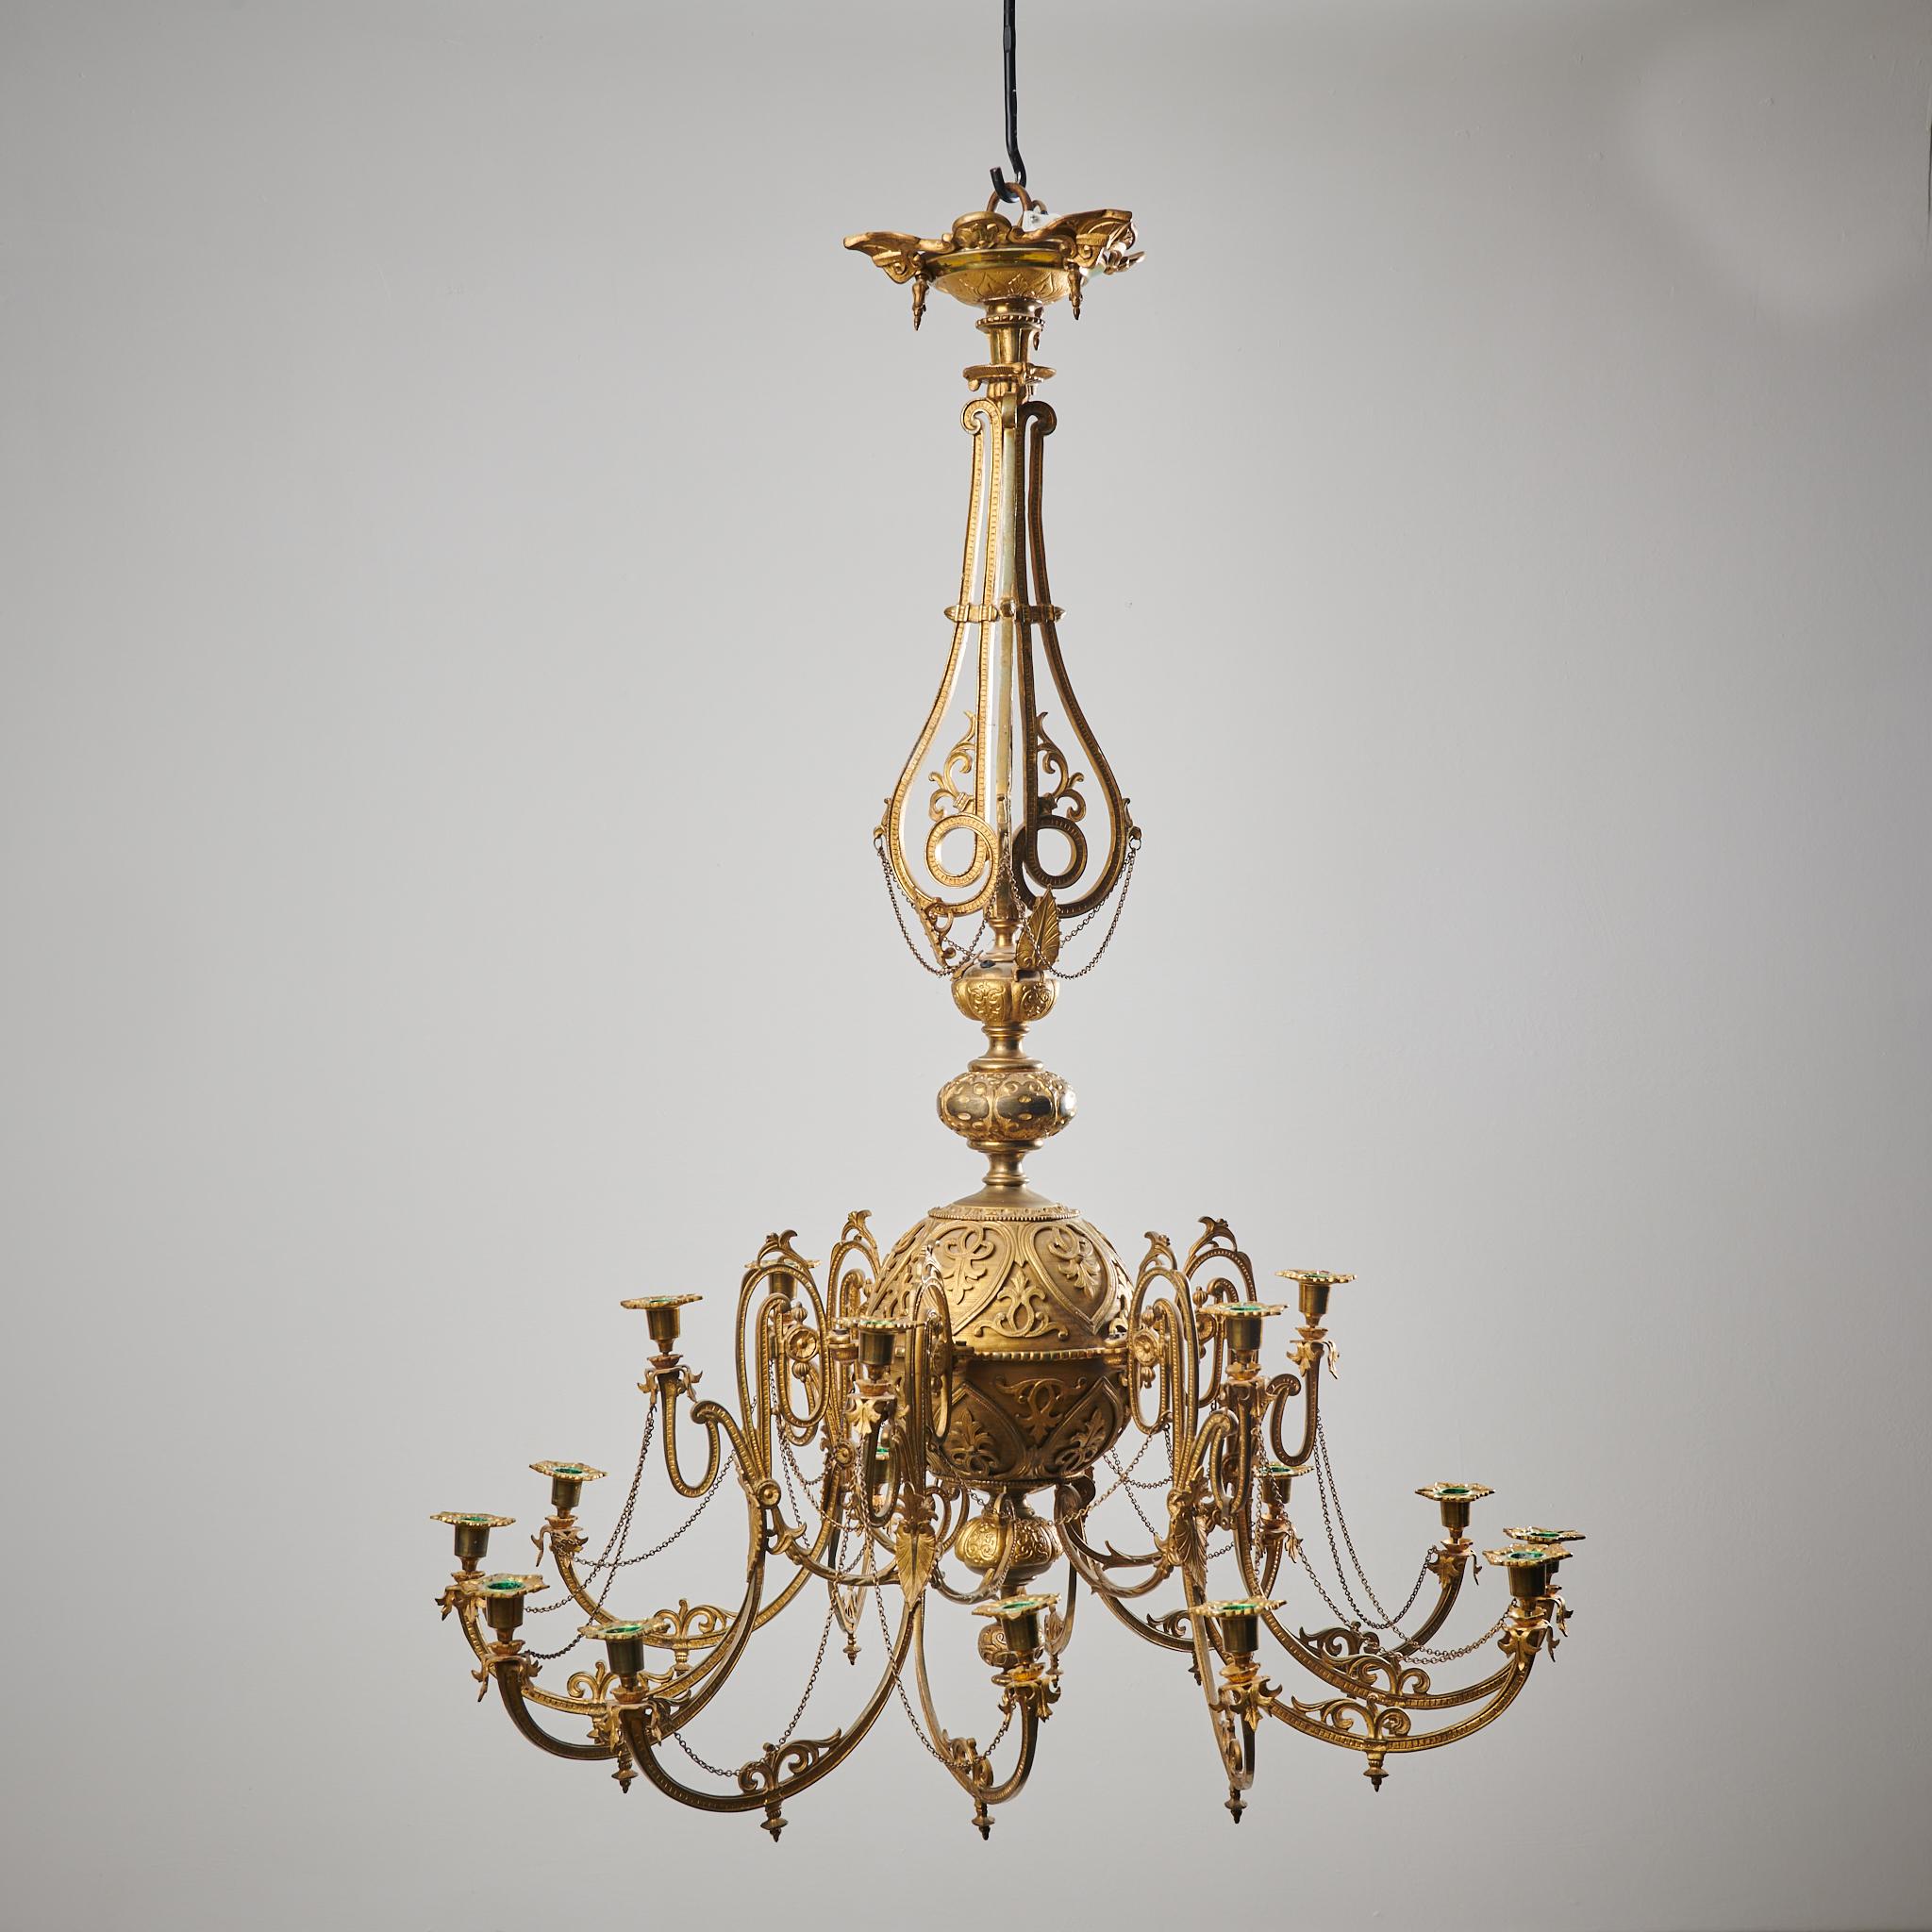 Antique Swedish bronzed chandelier made during the mid 1800s, around 1850 to 1860. The chandelier is made in bronzed metal with a richly decorated round frame. It has curved arms and an intricate decor in the form of chains, leaves and other